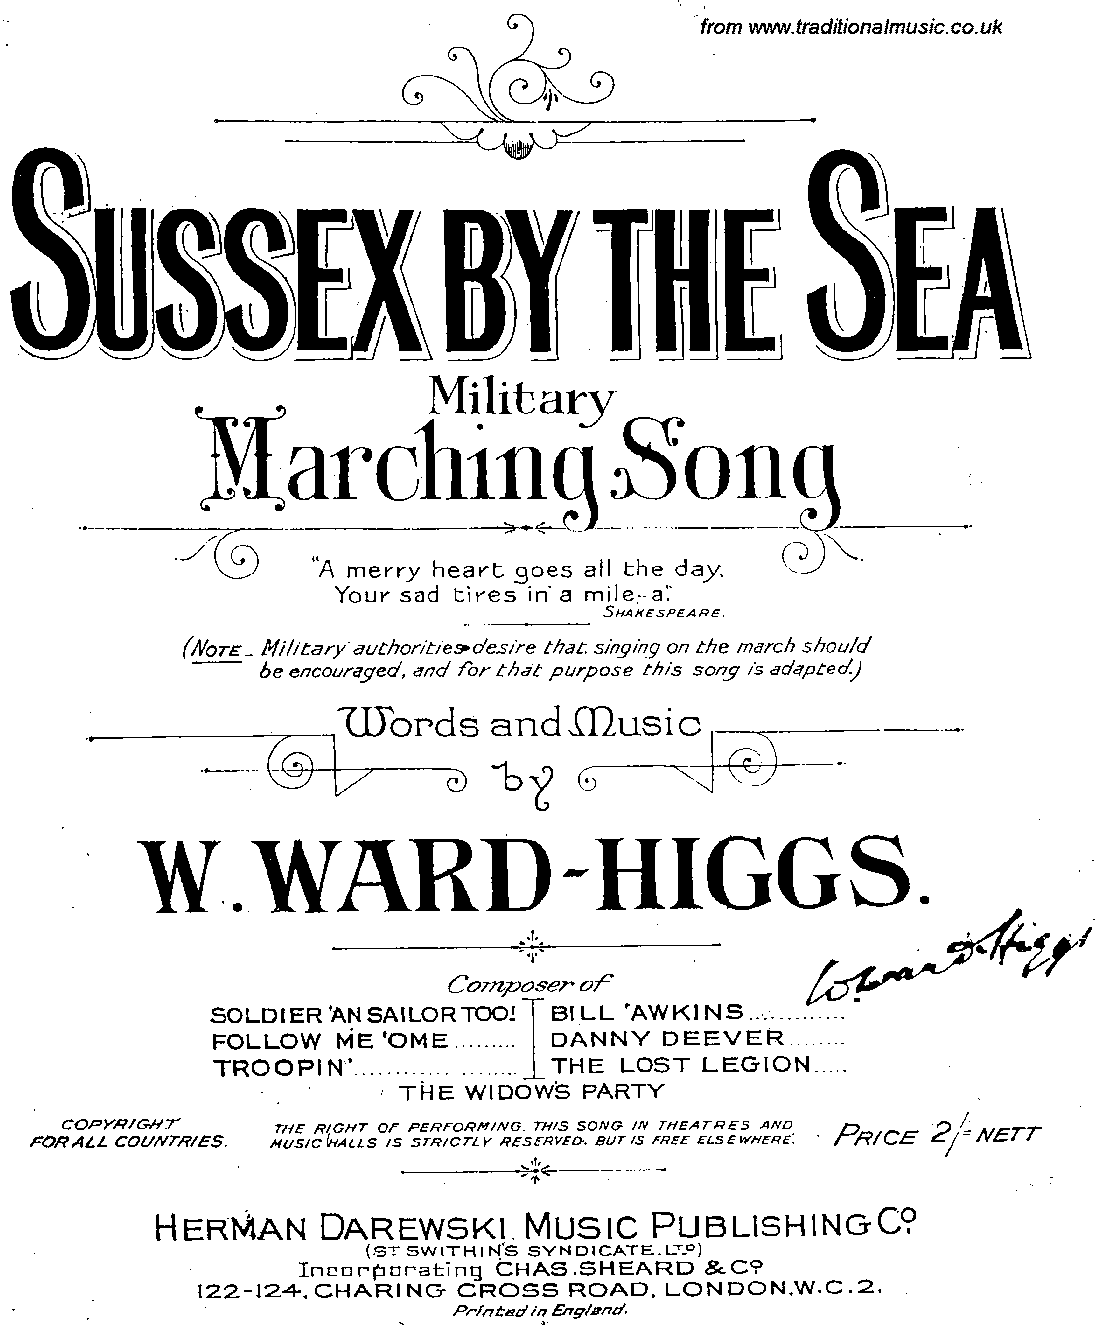 Sussex By The Sea, Complete Score, page 10 of 11